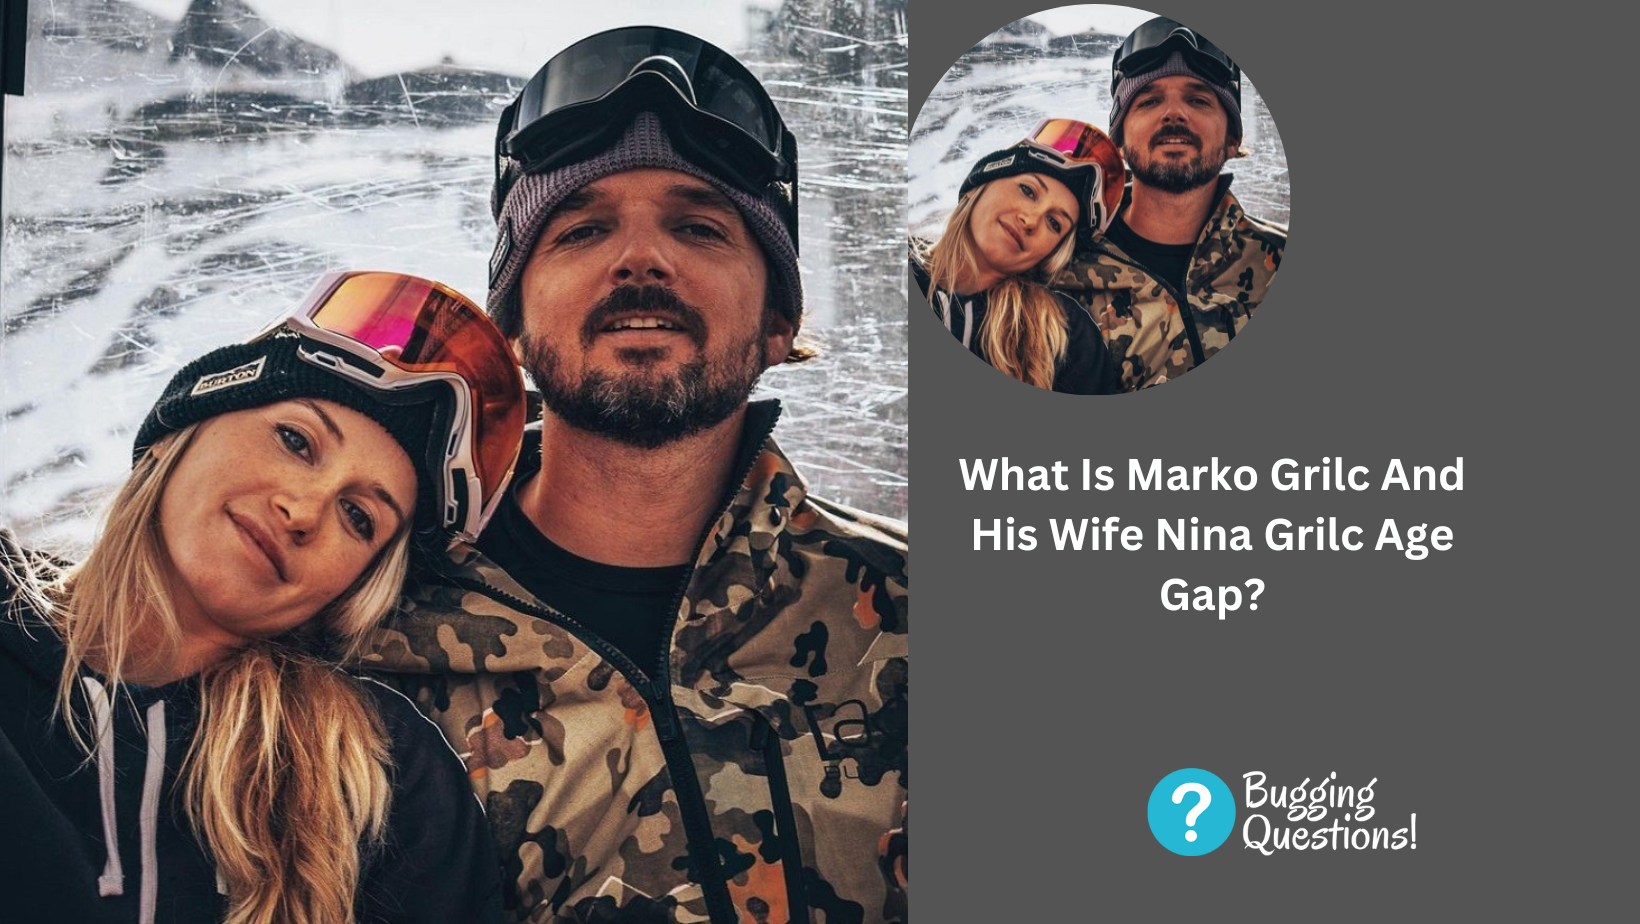 What Is Marko Grilc And His Wife Nina Grilc Age Gap?